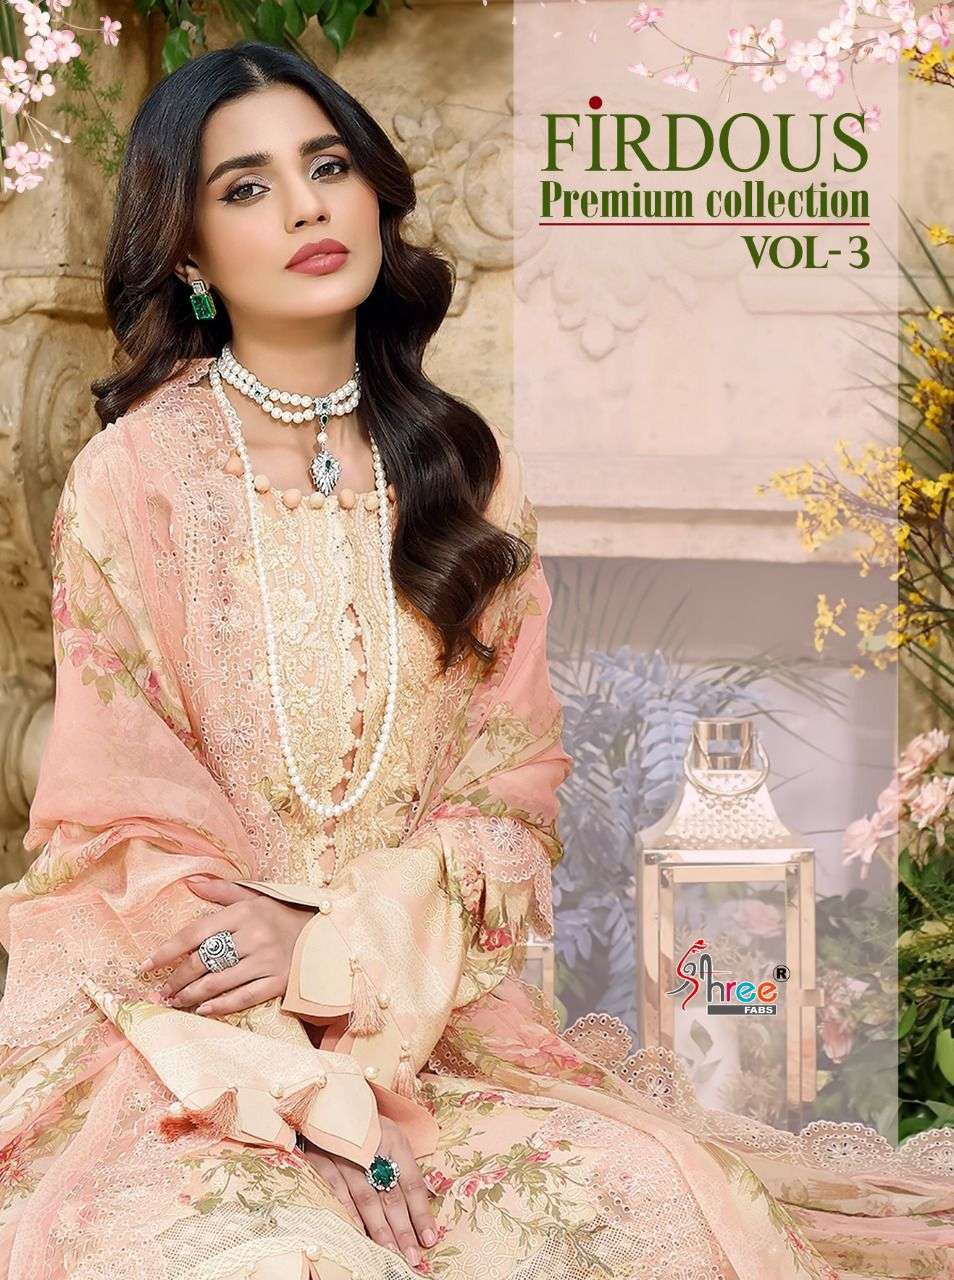 SHREE FABS FIRDOUS PREMIUM COLLECTION VOL 3 Cotton with fanc...